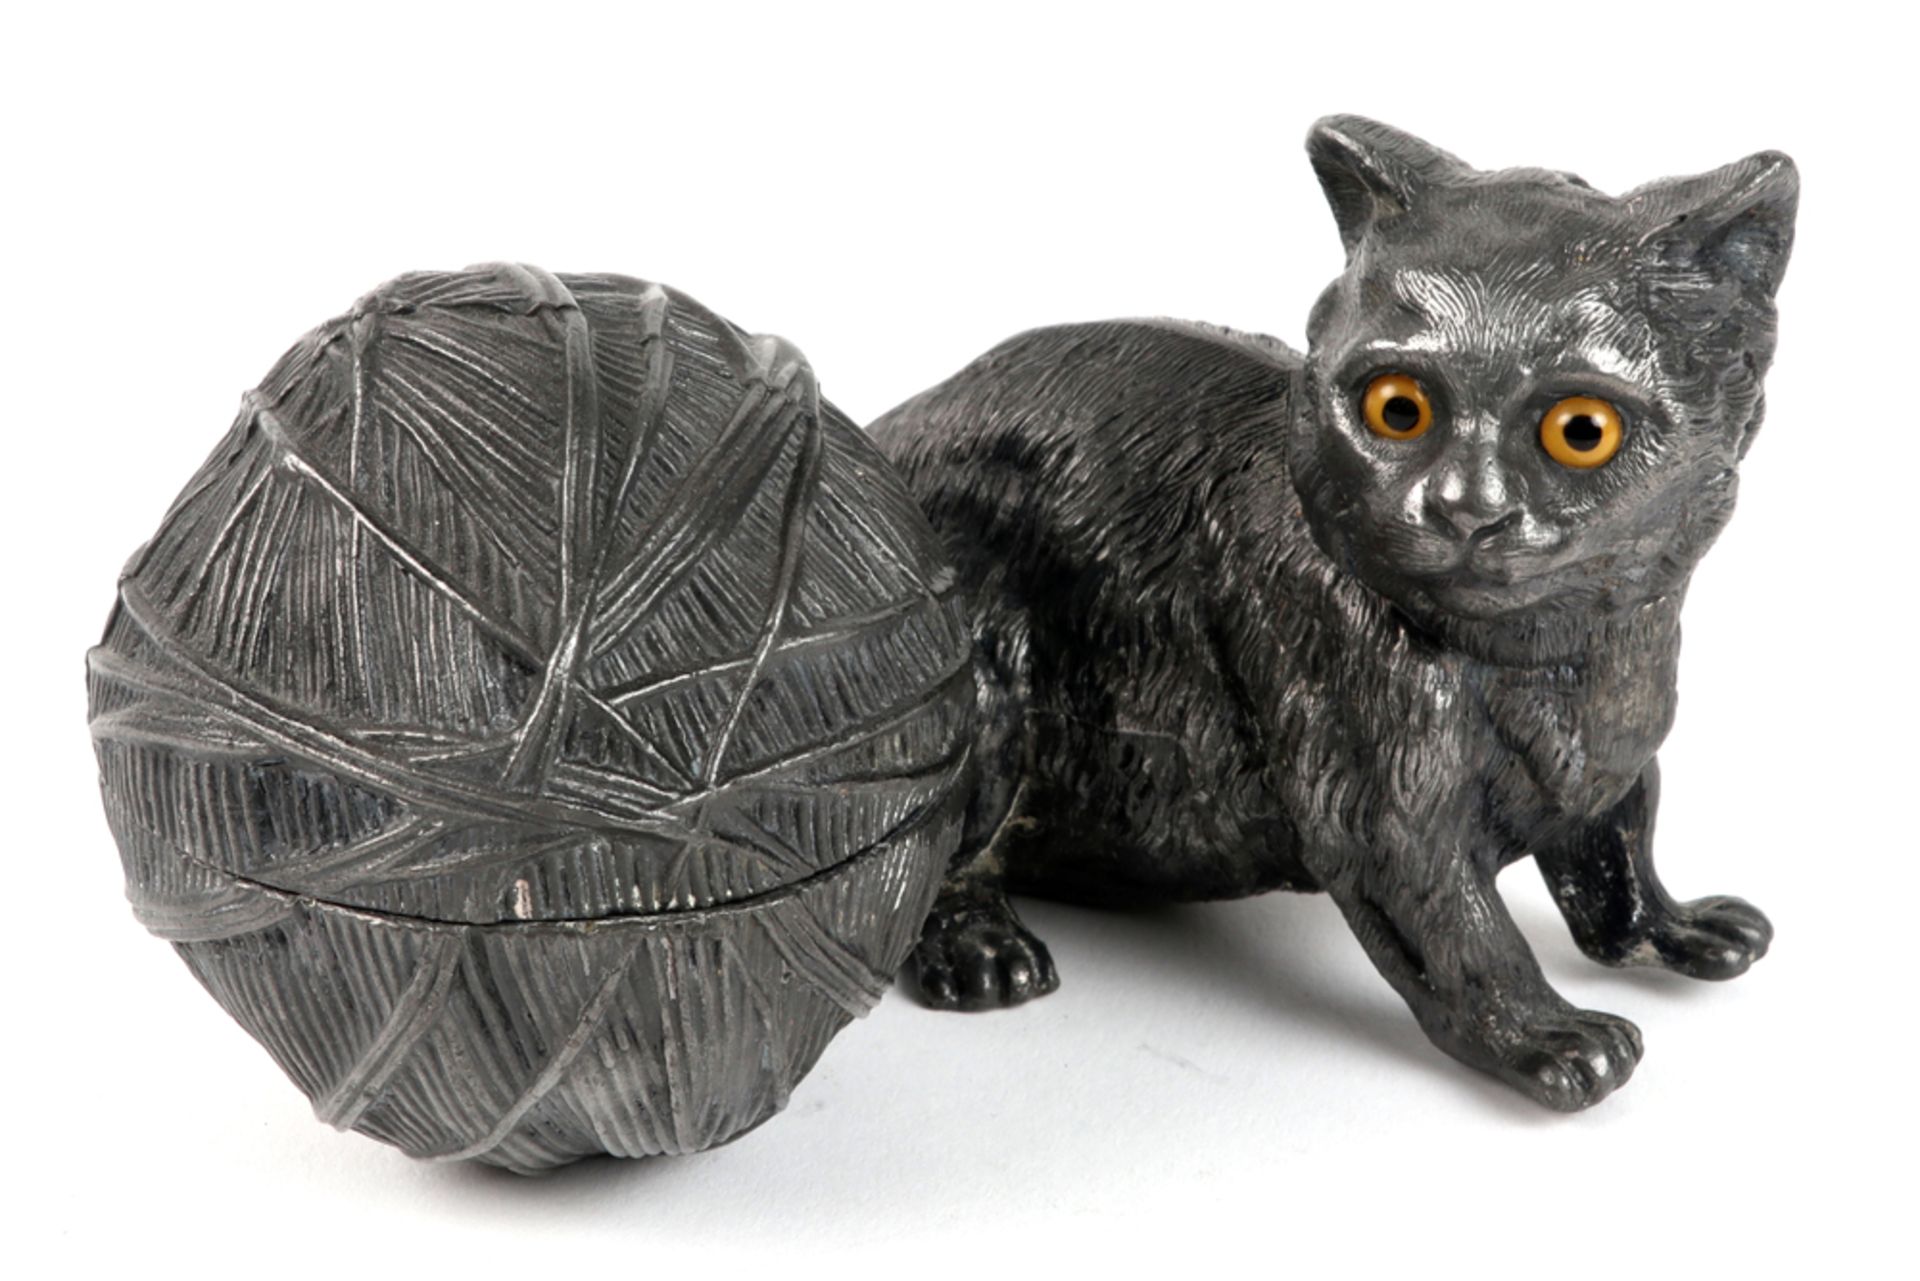 antique silverplated pewter inkwell in the shape of a cat (with glass eyes)